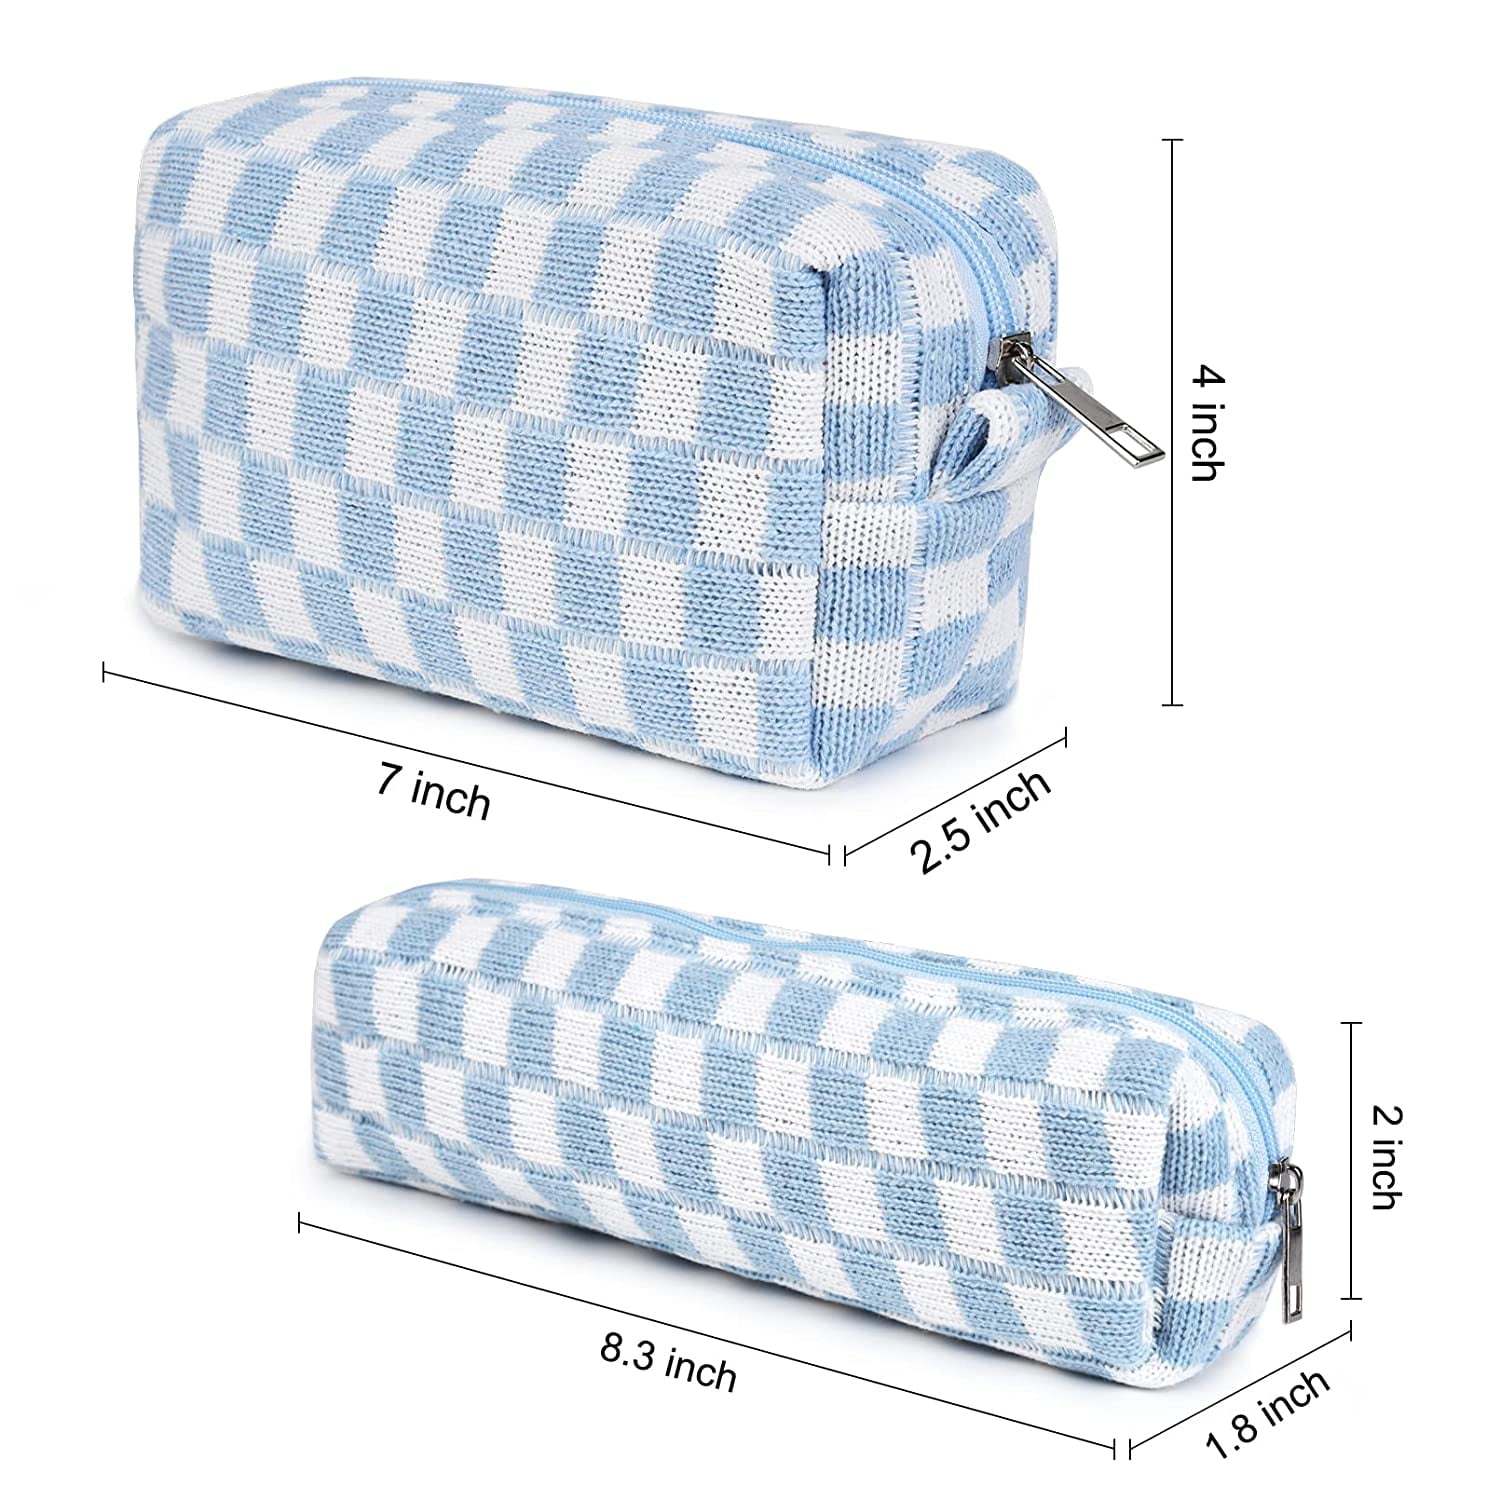 SOIDRAM 2 Pieces Makeup Bag Checkered Cosmetic Bag Purple Blue Makeup Pouch  Travel Toiletry Bag Organizer Cute Makeup Brushes Storage Bag for Women